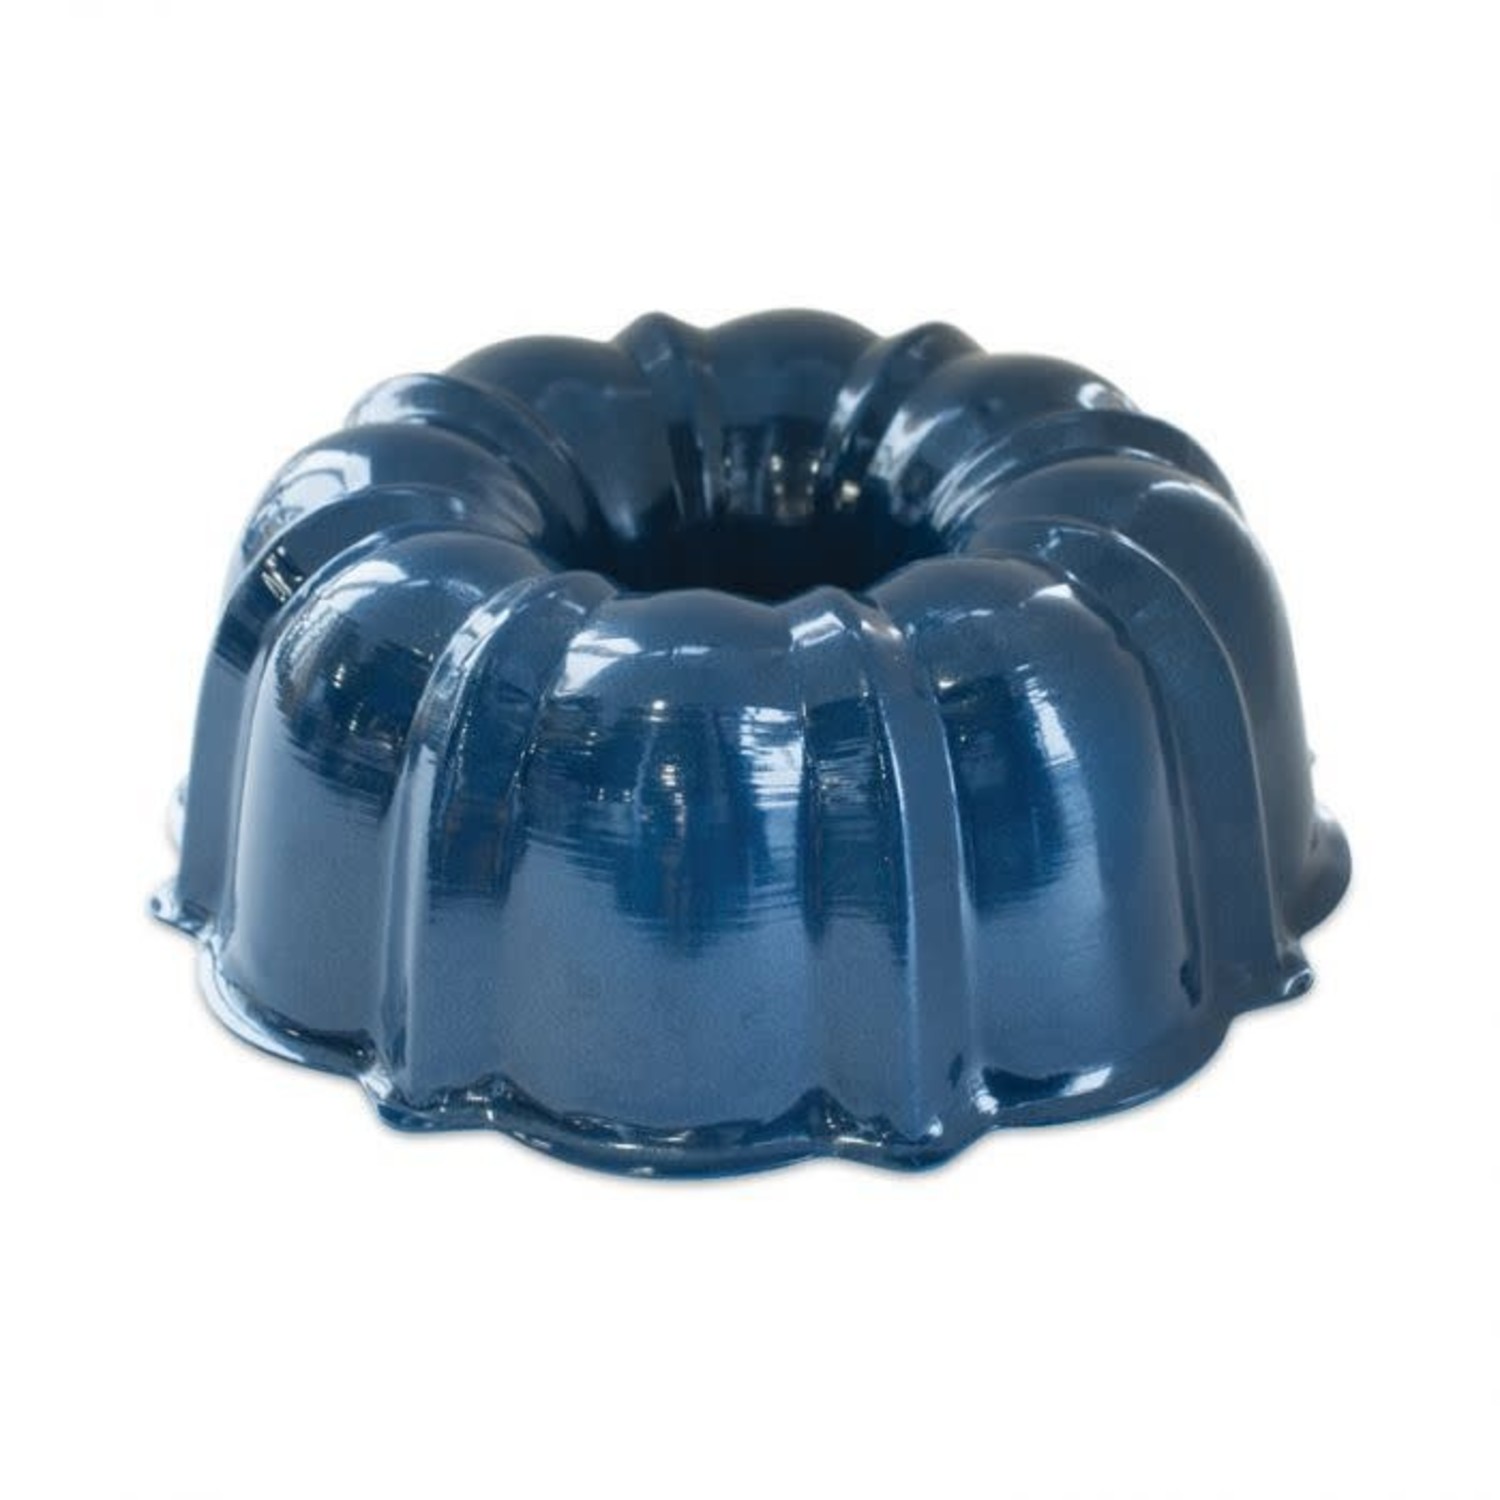 Nordic Ware Nordic Ware 12-Cup Multi Colored Bundt Pan - Whisk